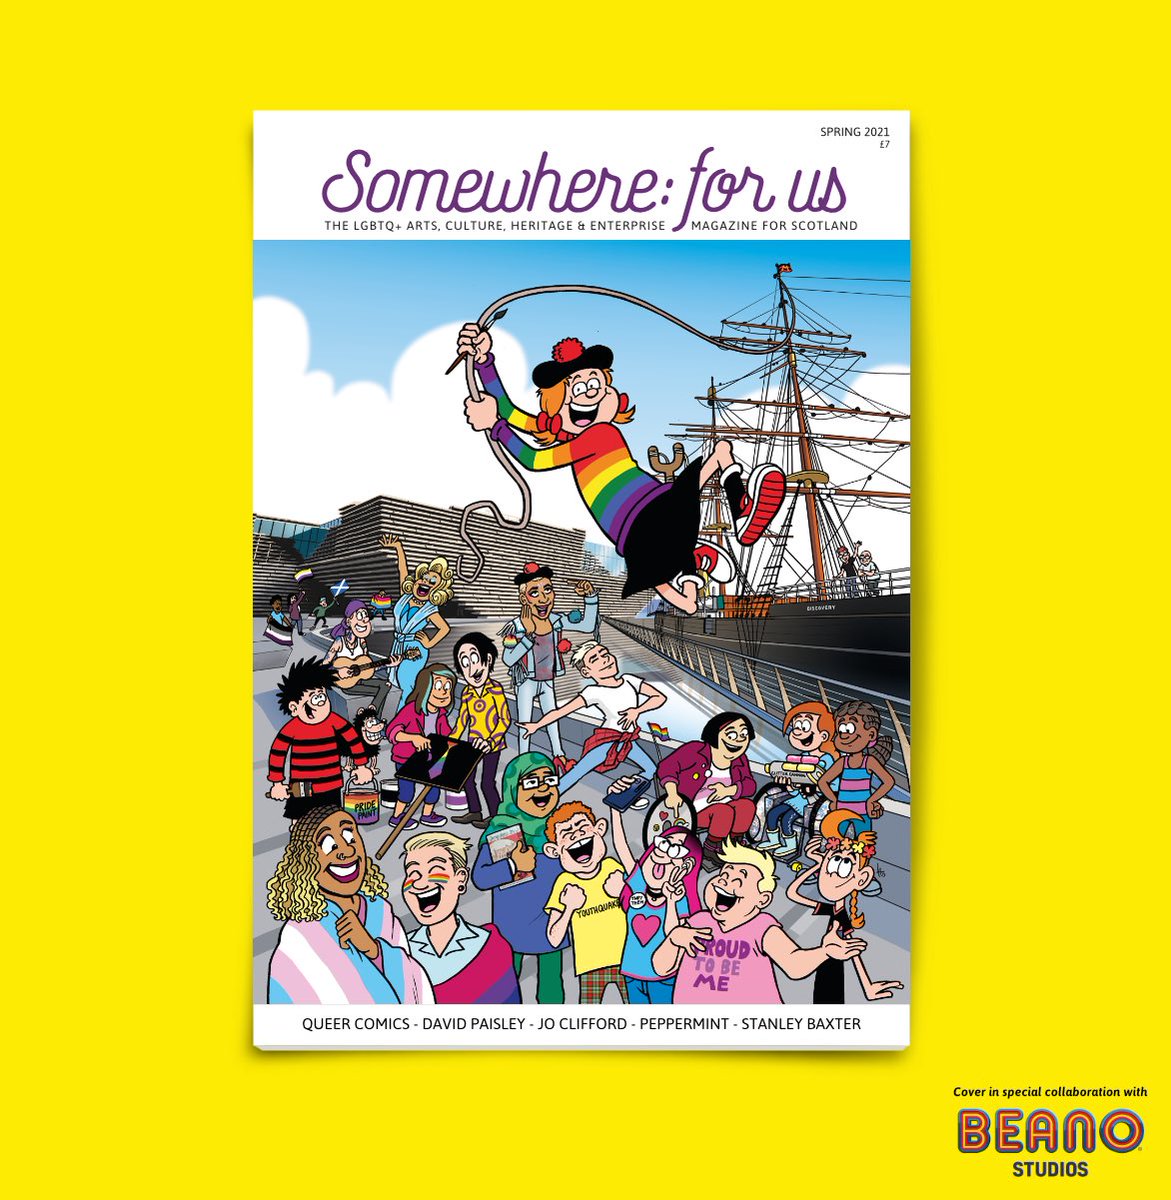 Happy @DundeePride 🏳️‍🌈 to everyone attending. We hope you all have a weekend filled with love and pride.

The award-winning cover of the Spring 2021 issue of our #SomewhereForUs magazine was a special collaboration with Dundee-based @BeanoOfficial. It’s still a favourite of ours!